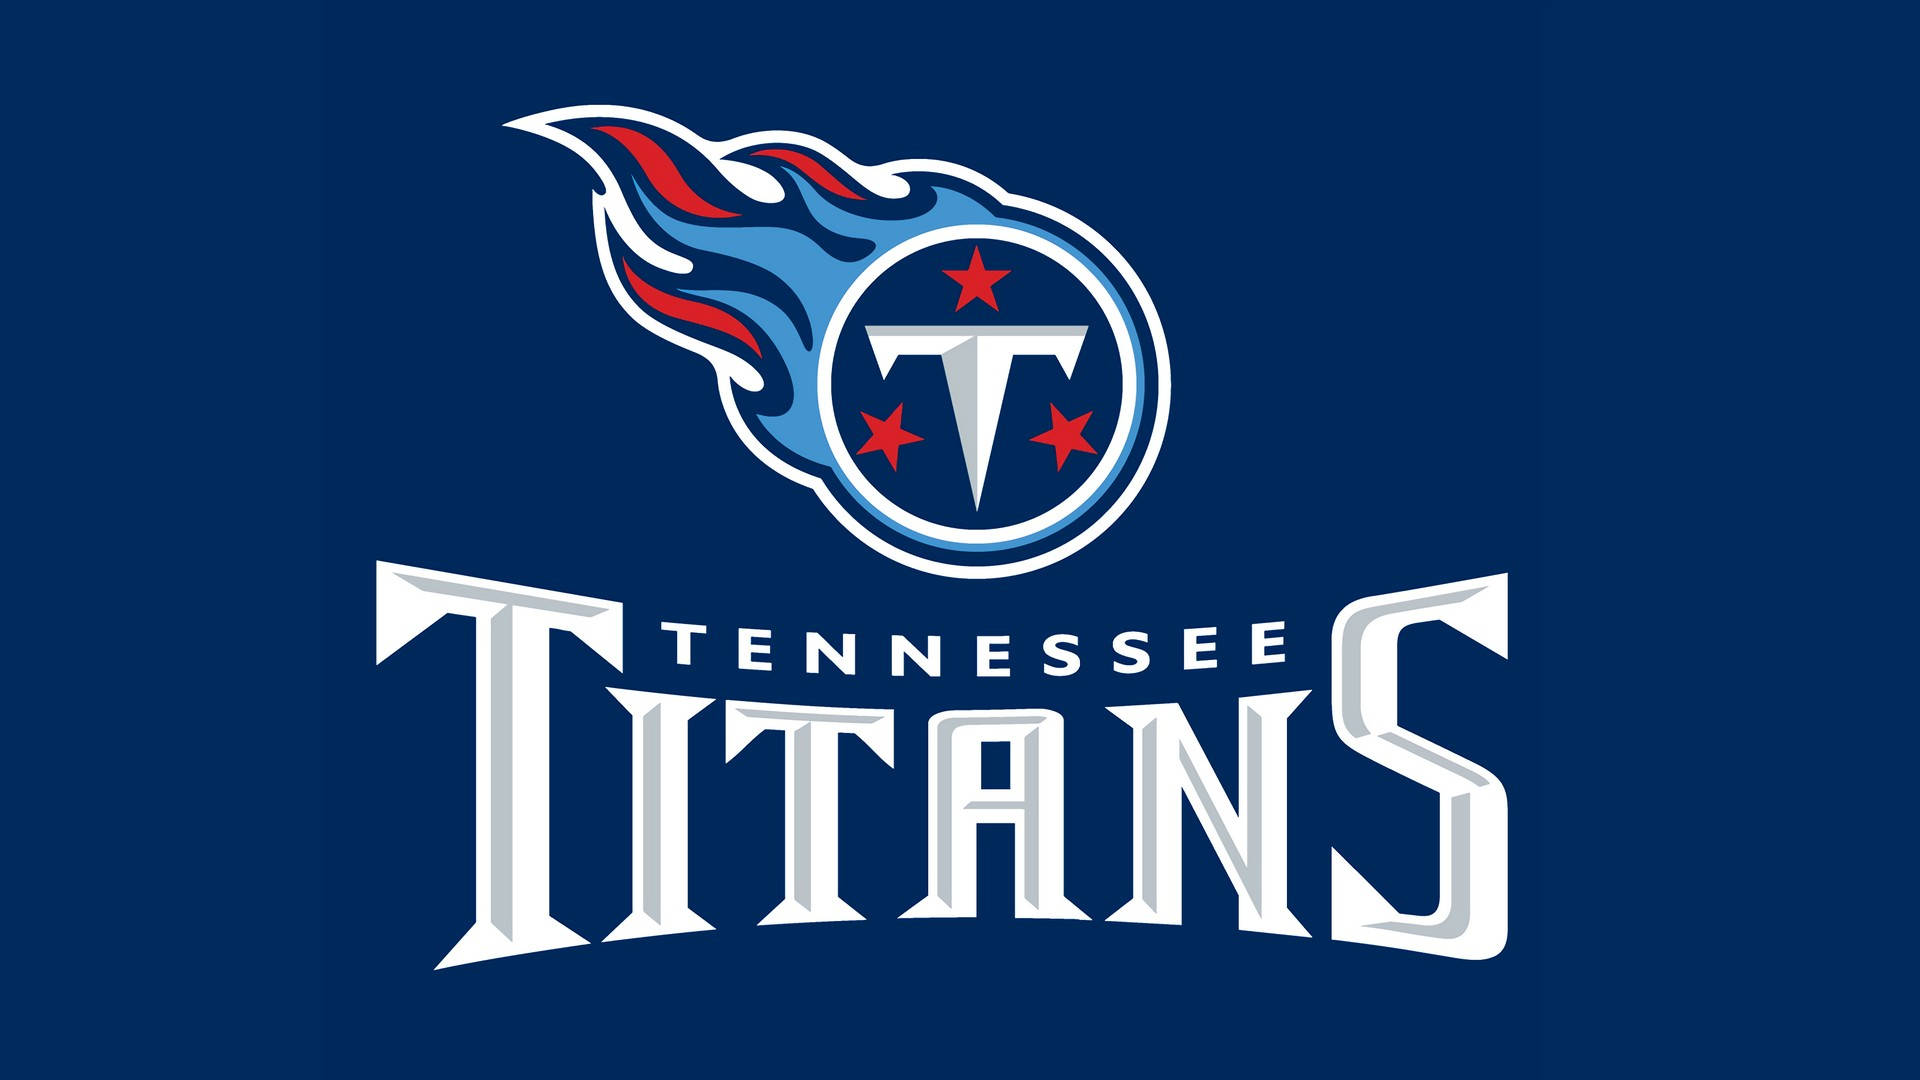 10 Tennessee Titans HD Wallpapers and Backgrounds